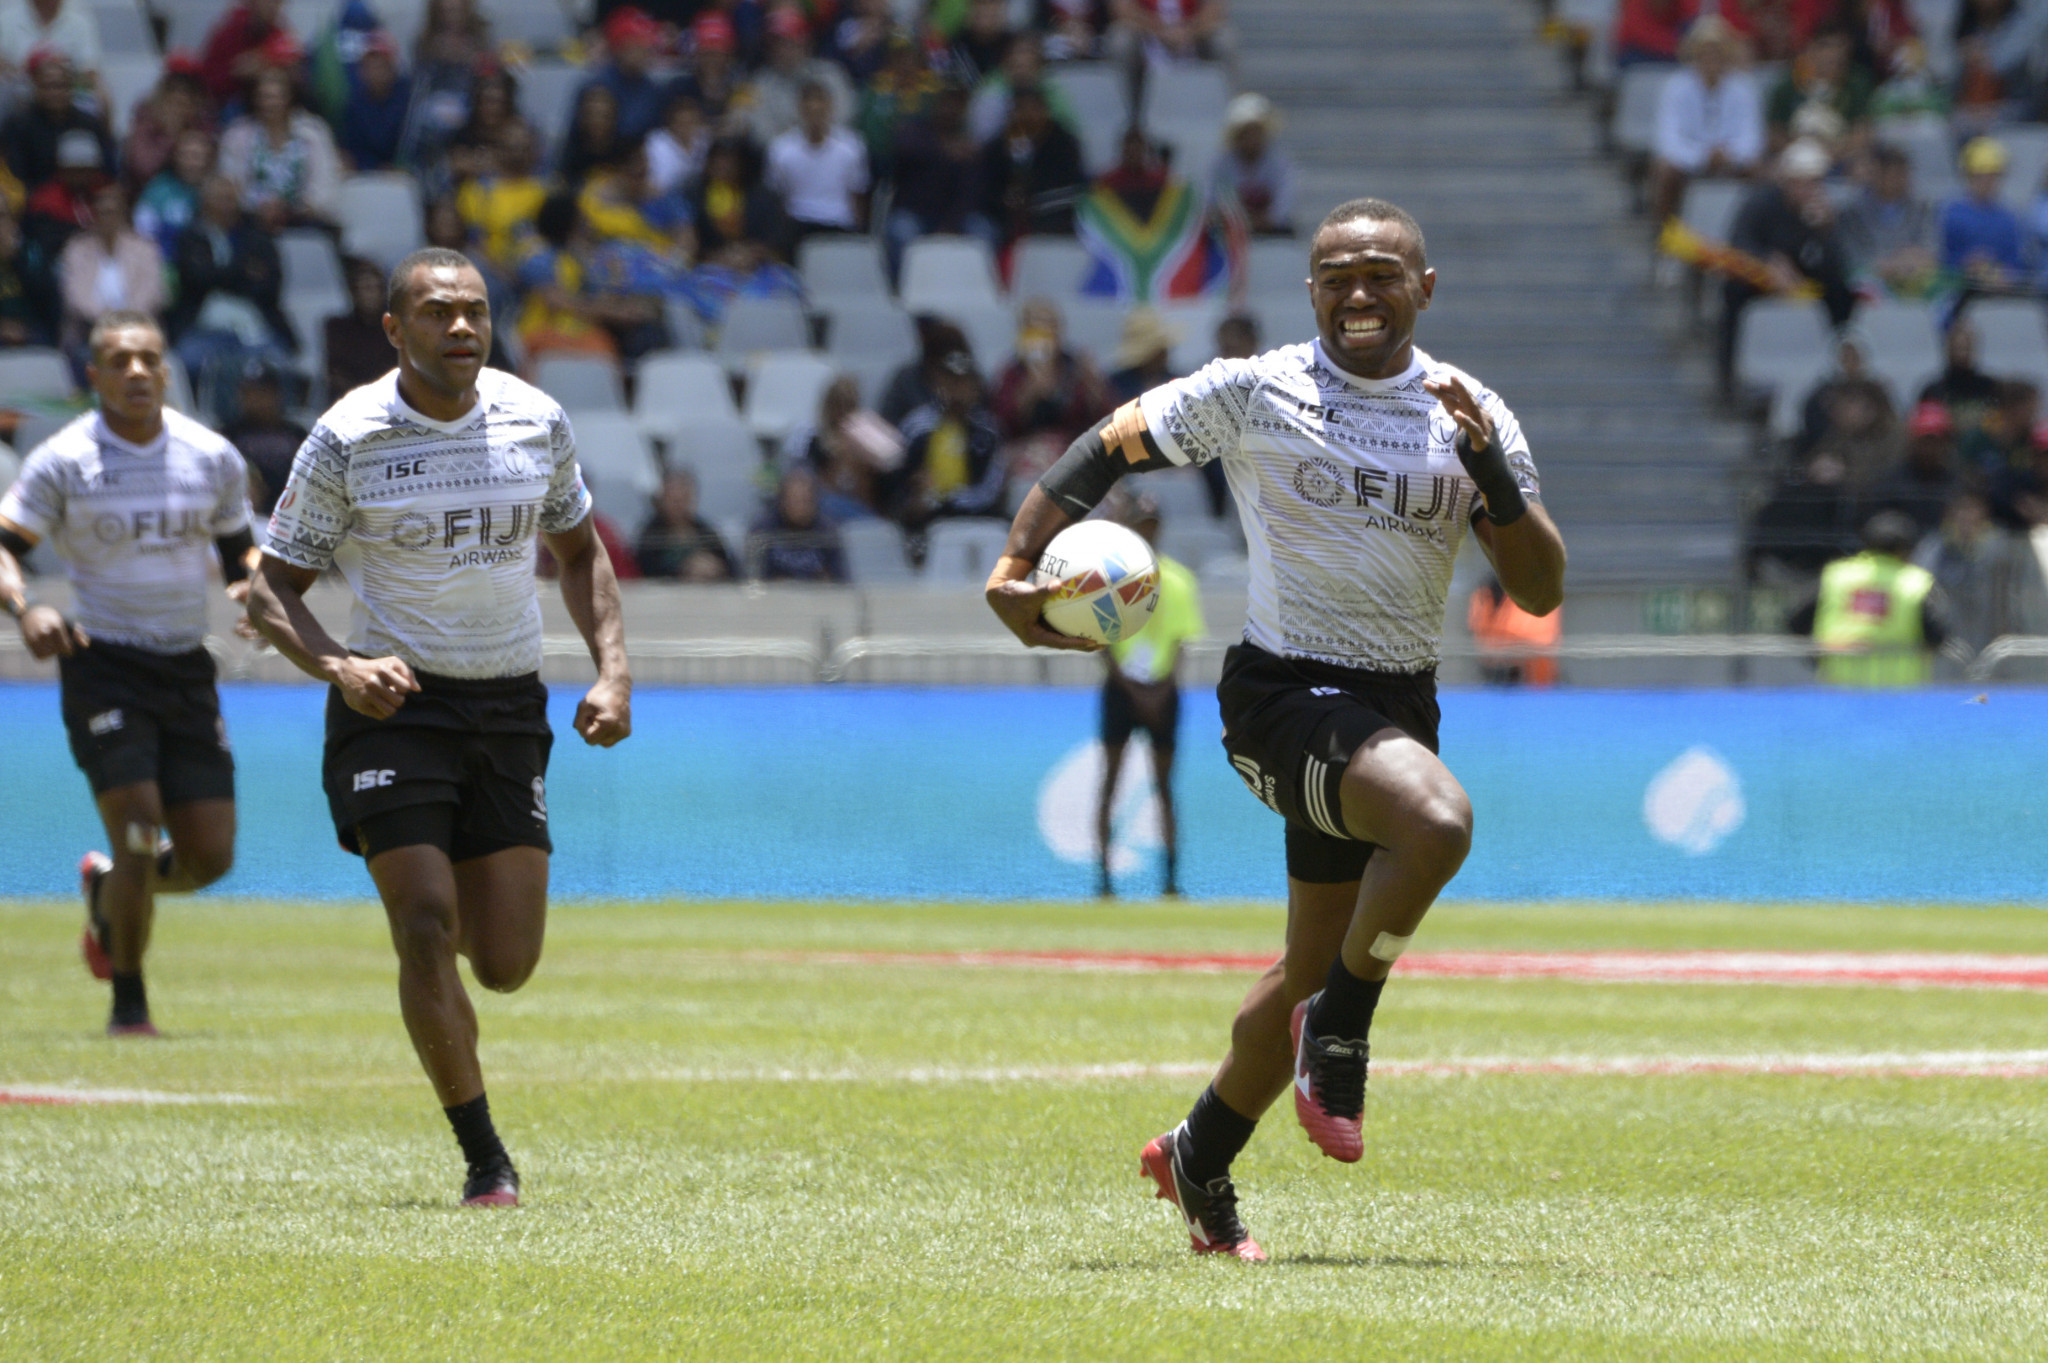 Fiji's rugby sevens teams are the only athletes to have confirmed a place at Tokyo 2020 ©Getty Images